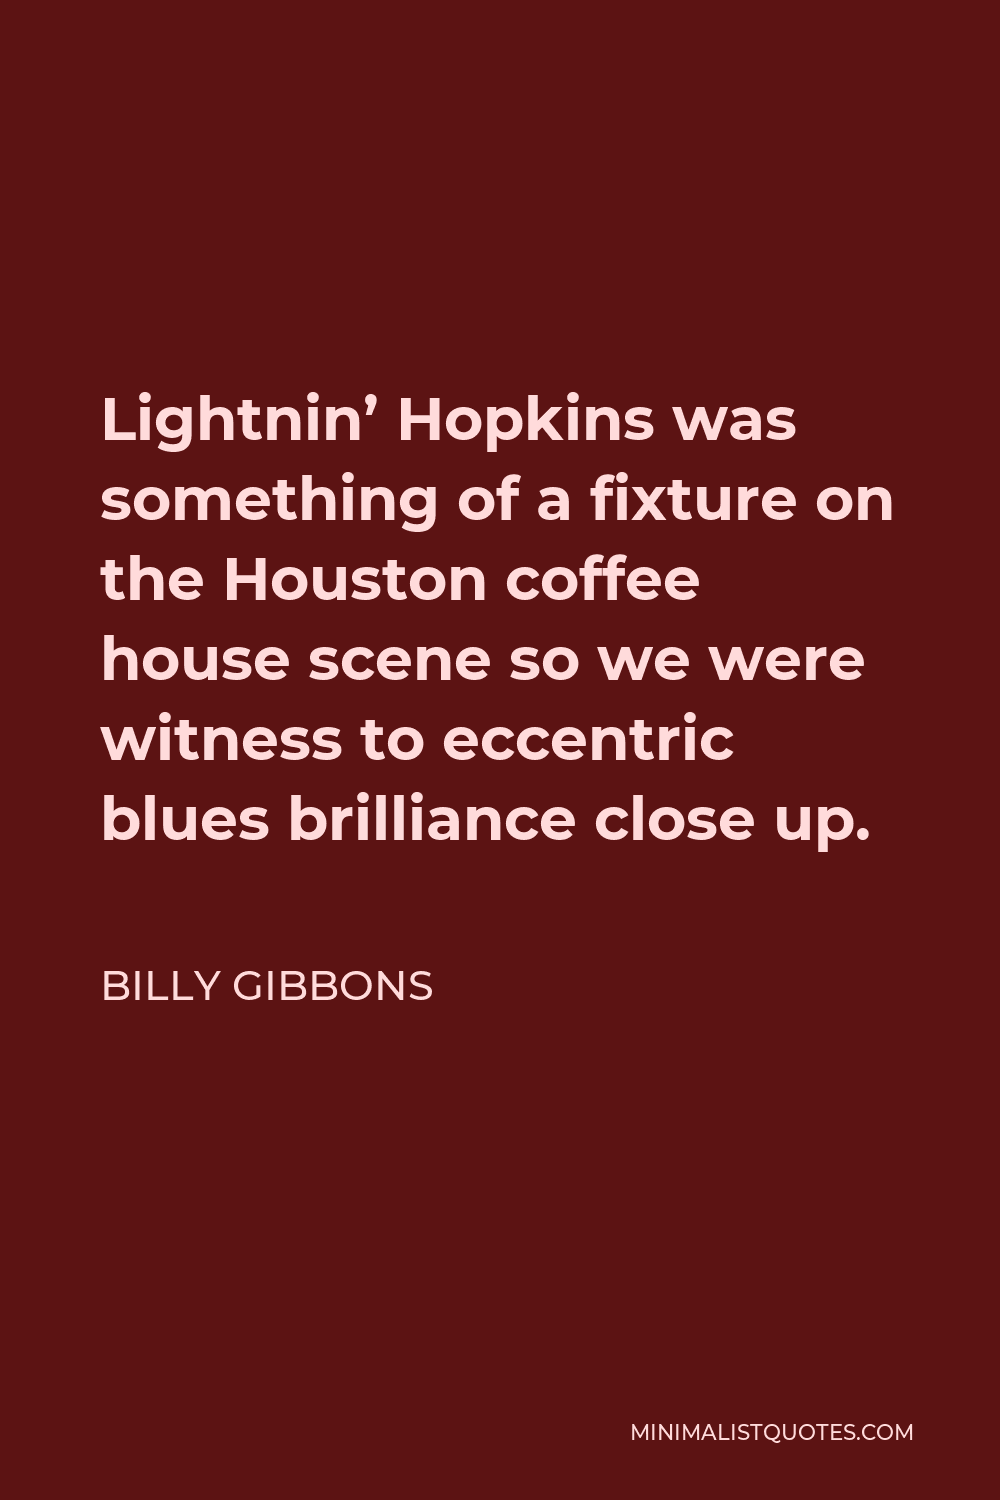 Billy Gibbons Quote - Lightnin’ Hopkins was something of a fixture on the Houston coffee house scene so we were witness to eccentric blues brilliance close up.